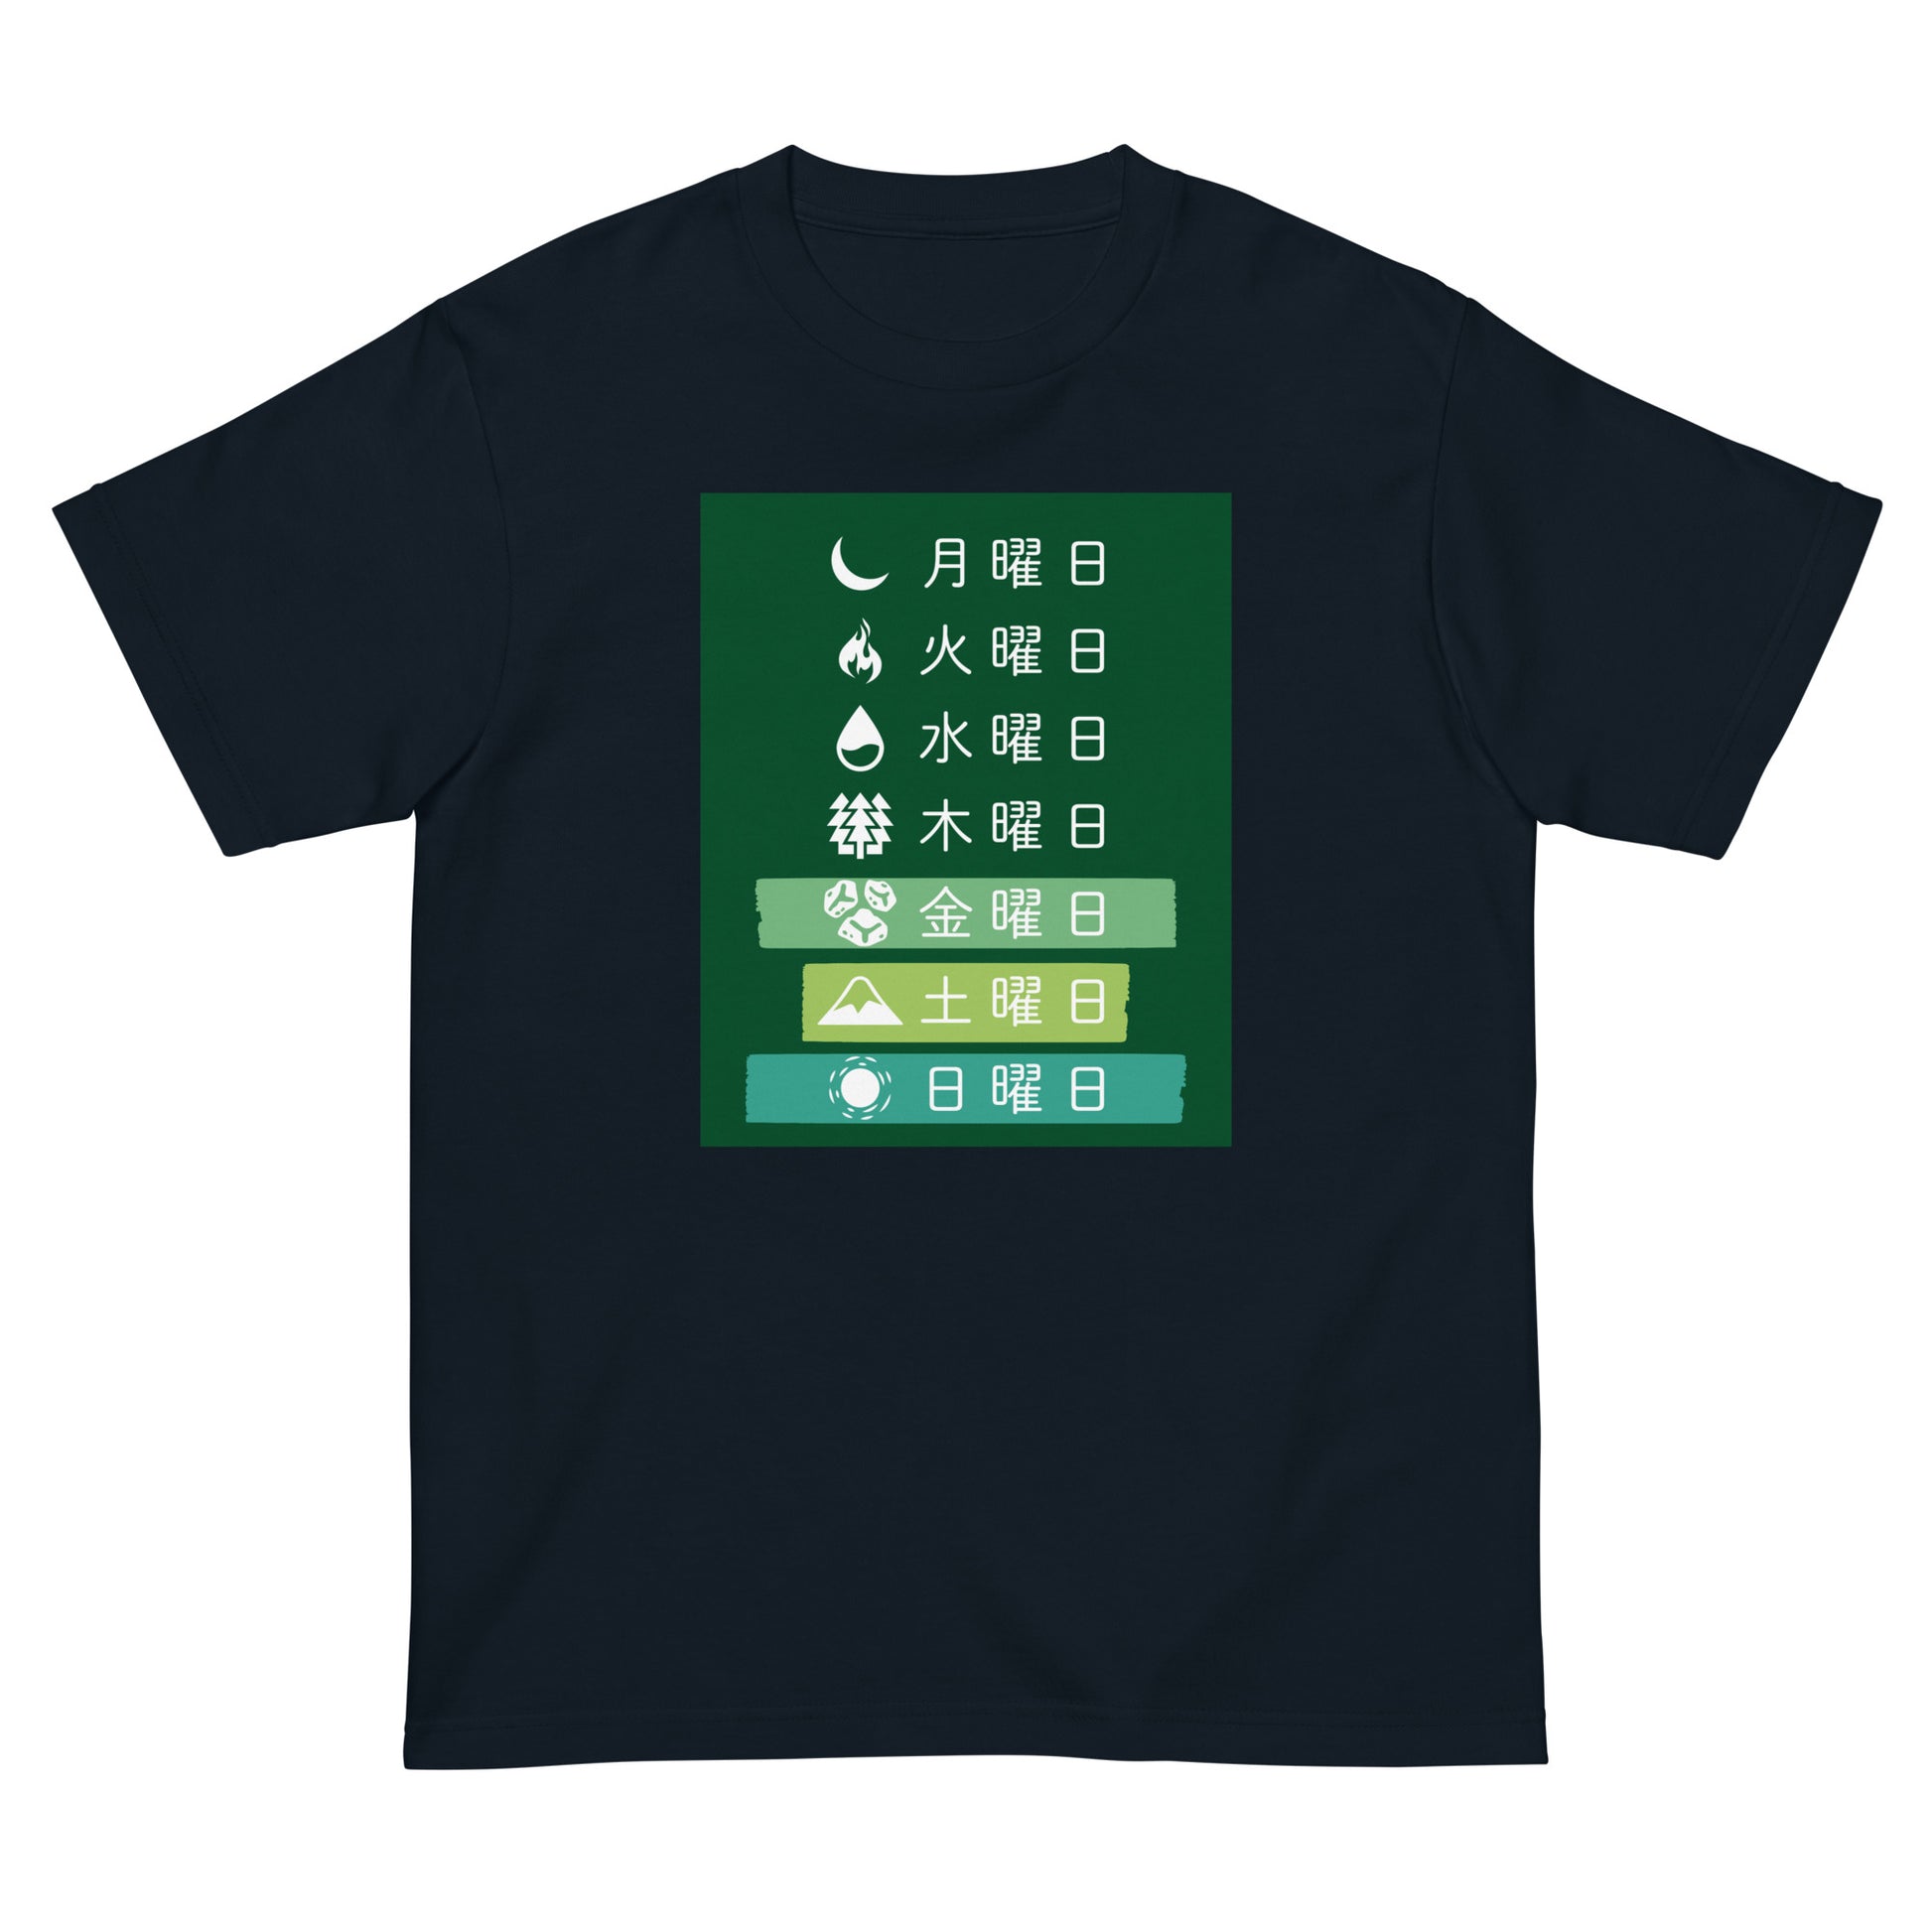 Navy High Quality Tee - Front Design with an White Uniwari Logo - Back Design with Weekdays in Japanese and Green back ground